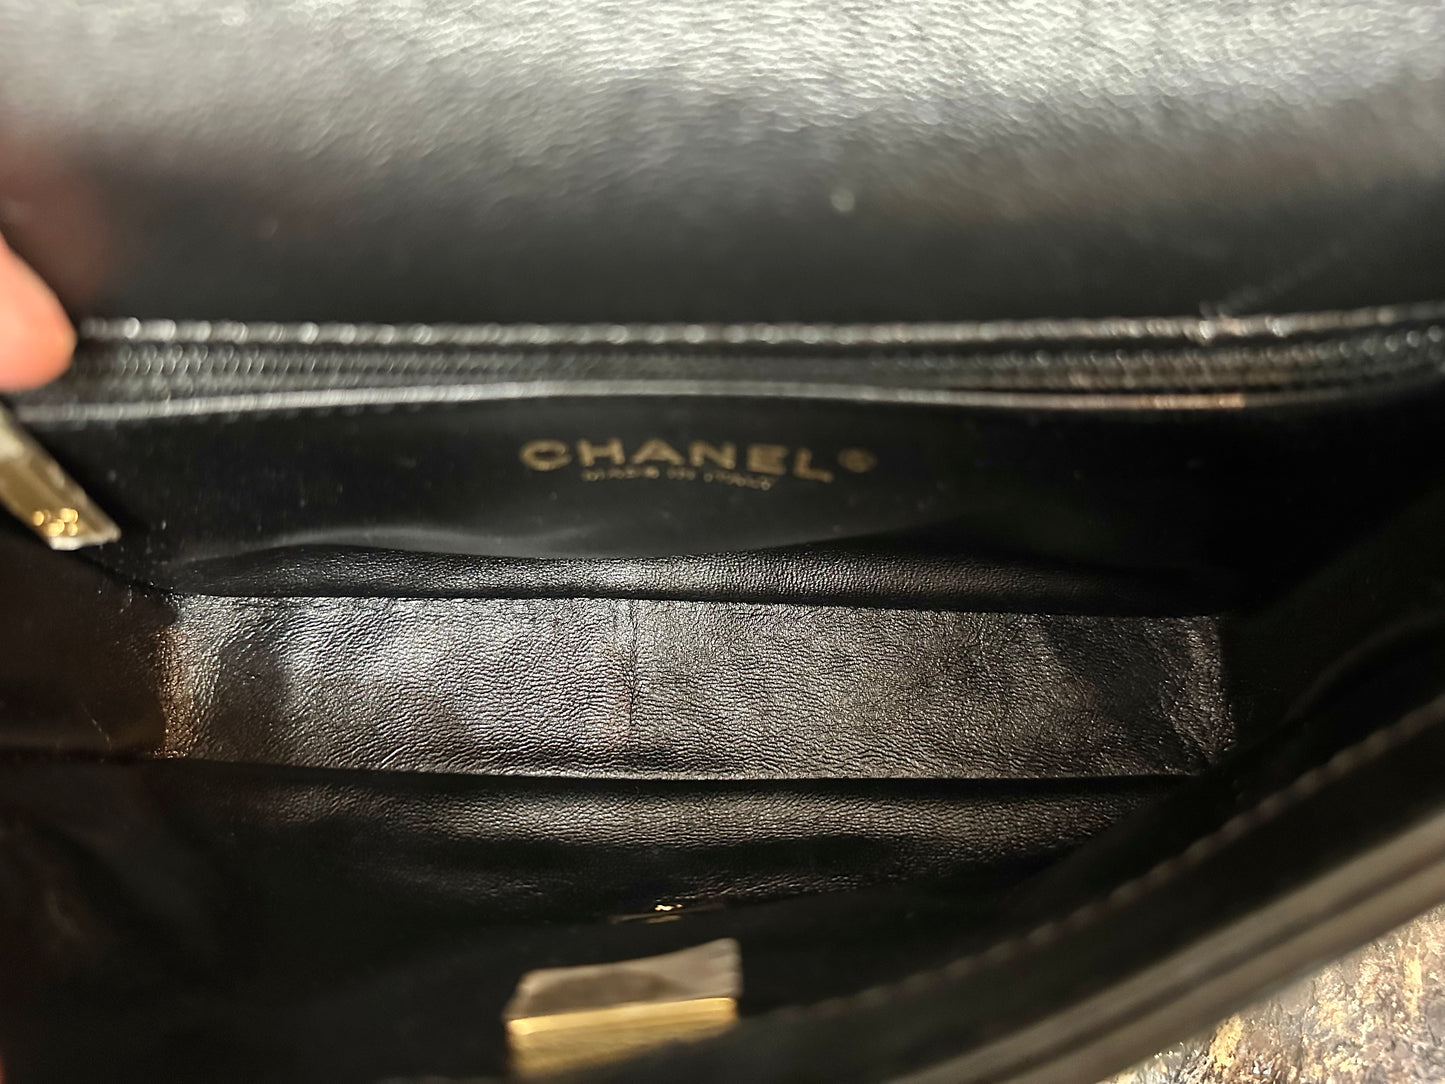 Top view of inside of bag with black leather